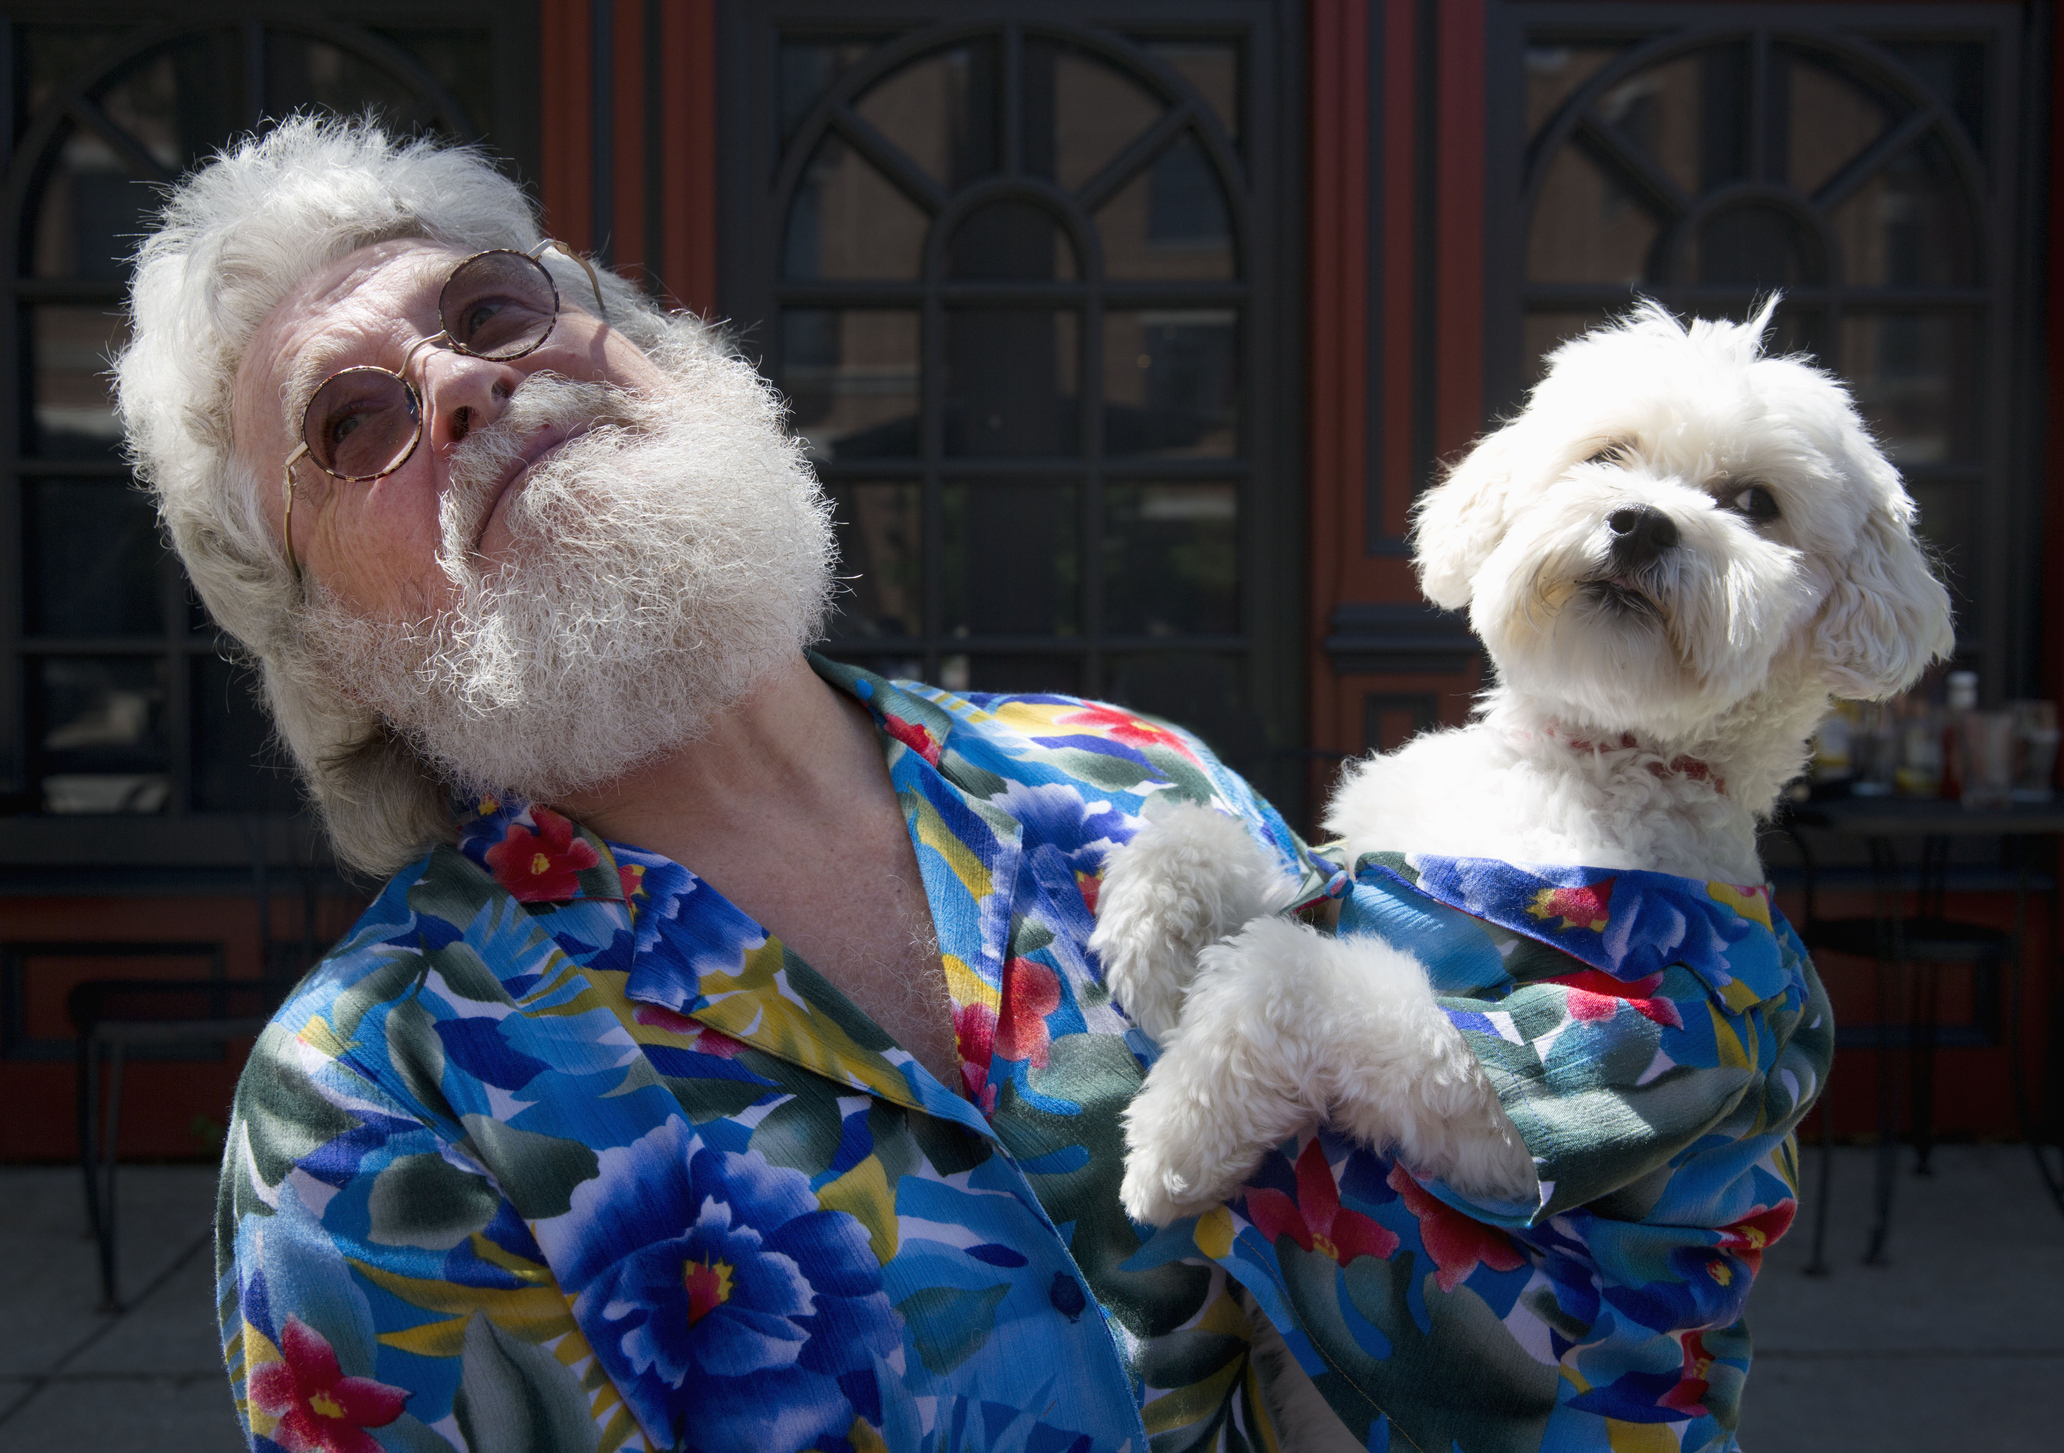 Man in floral shirt holding a small dog, both gazing upwards. They are outdoors near a building